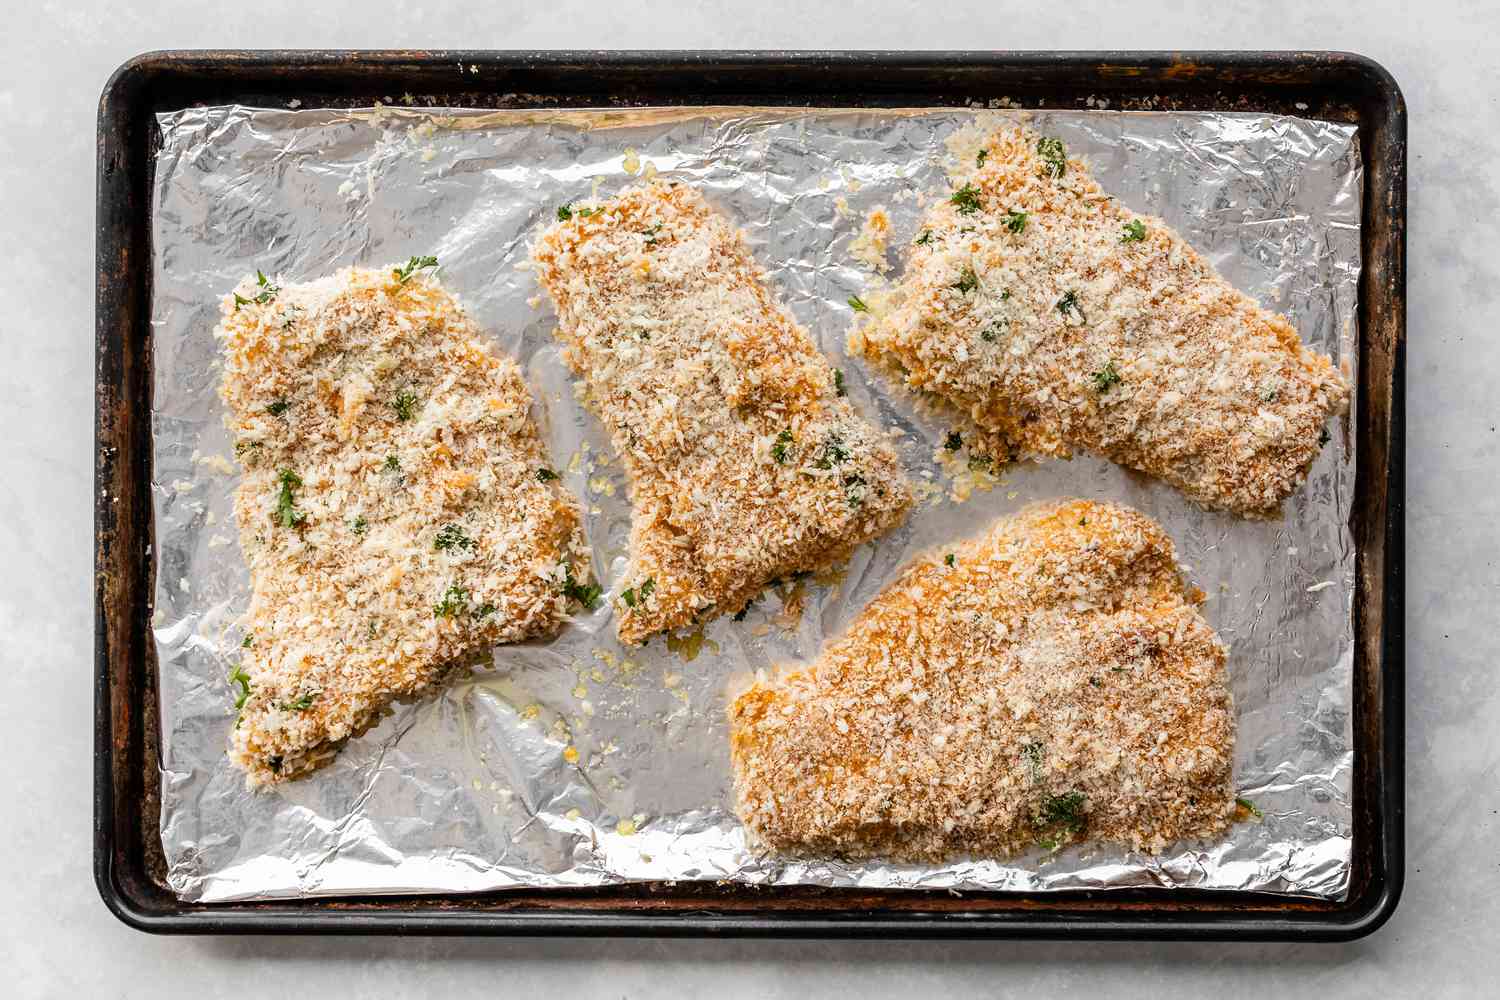 Panko-crusted haddock fillets on a rimmed baking sheet lined with foil